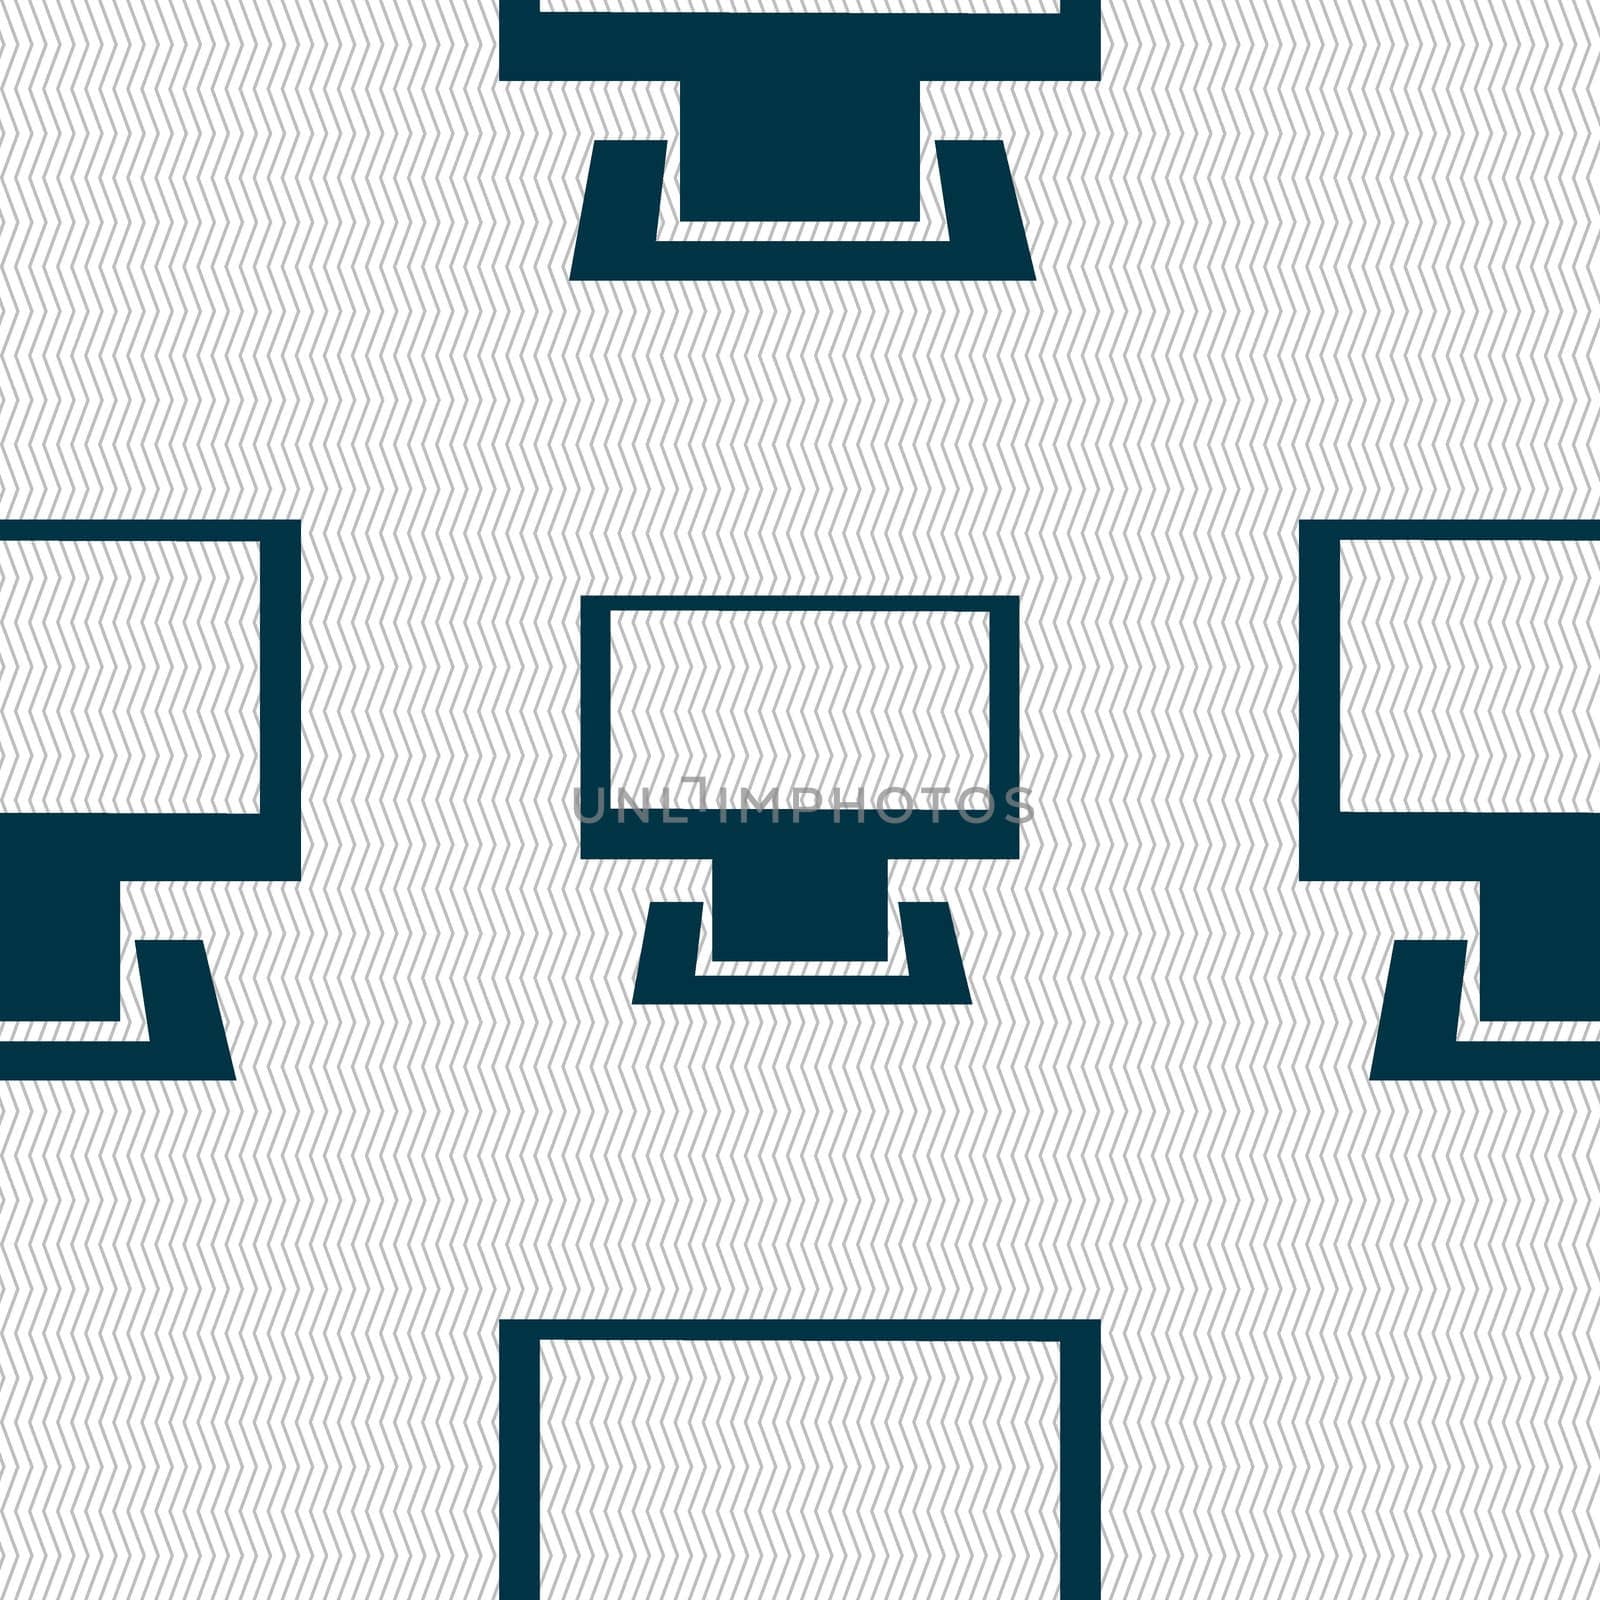 Computer widescreen monitor sign icon. Seamless abstract background with geometric shapes. illustration